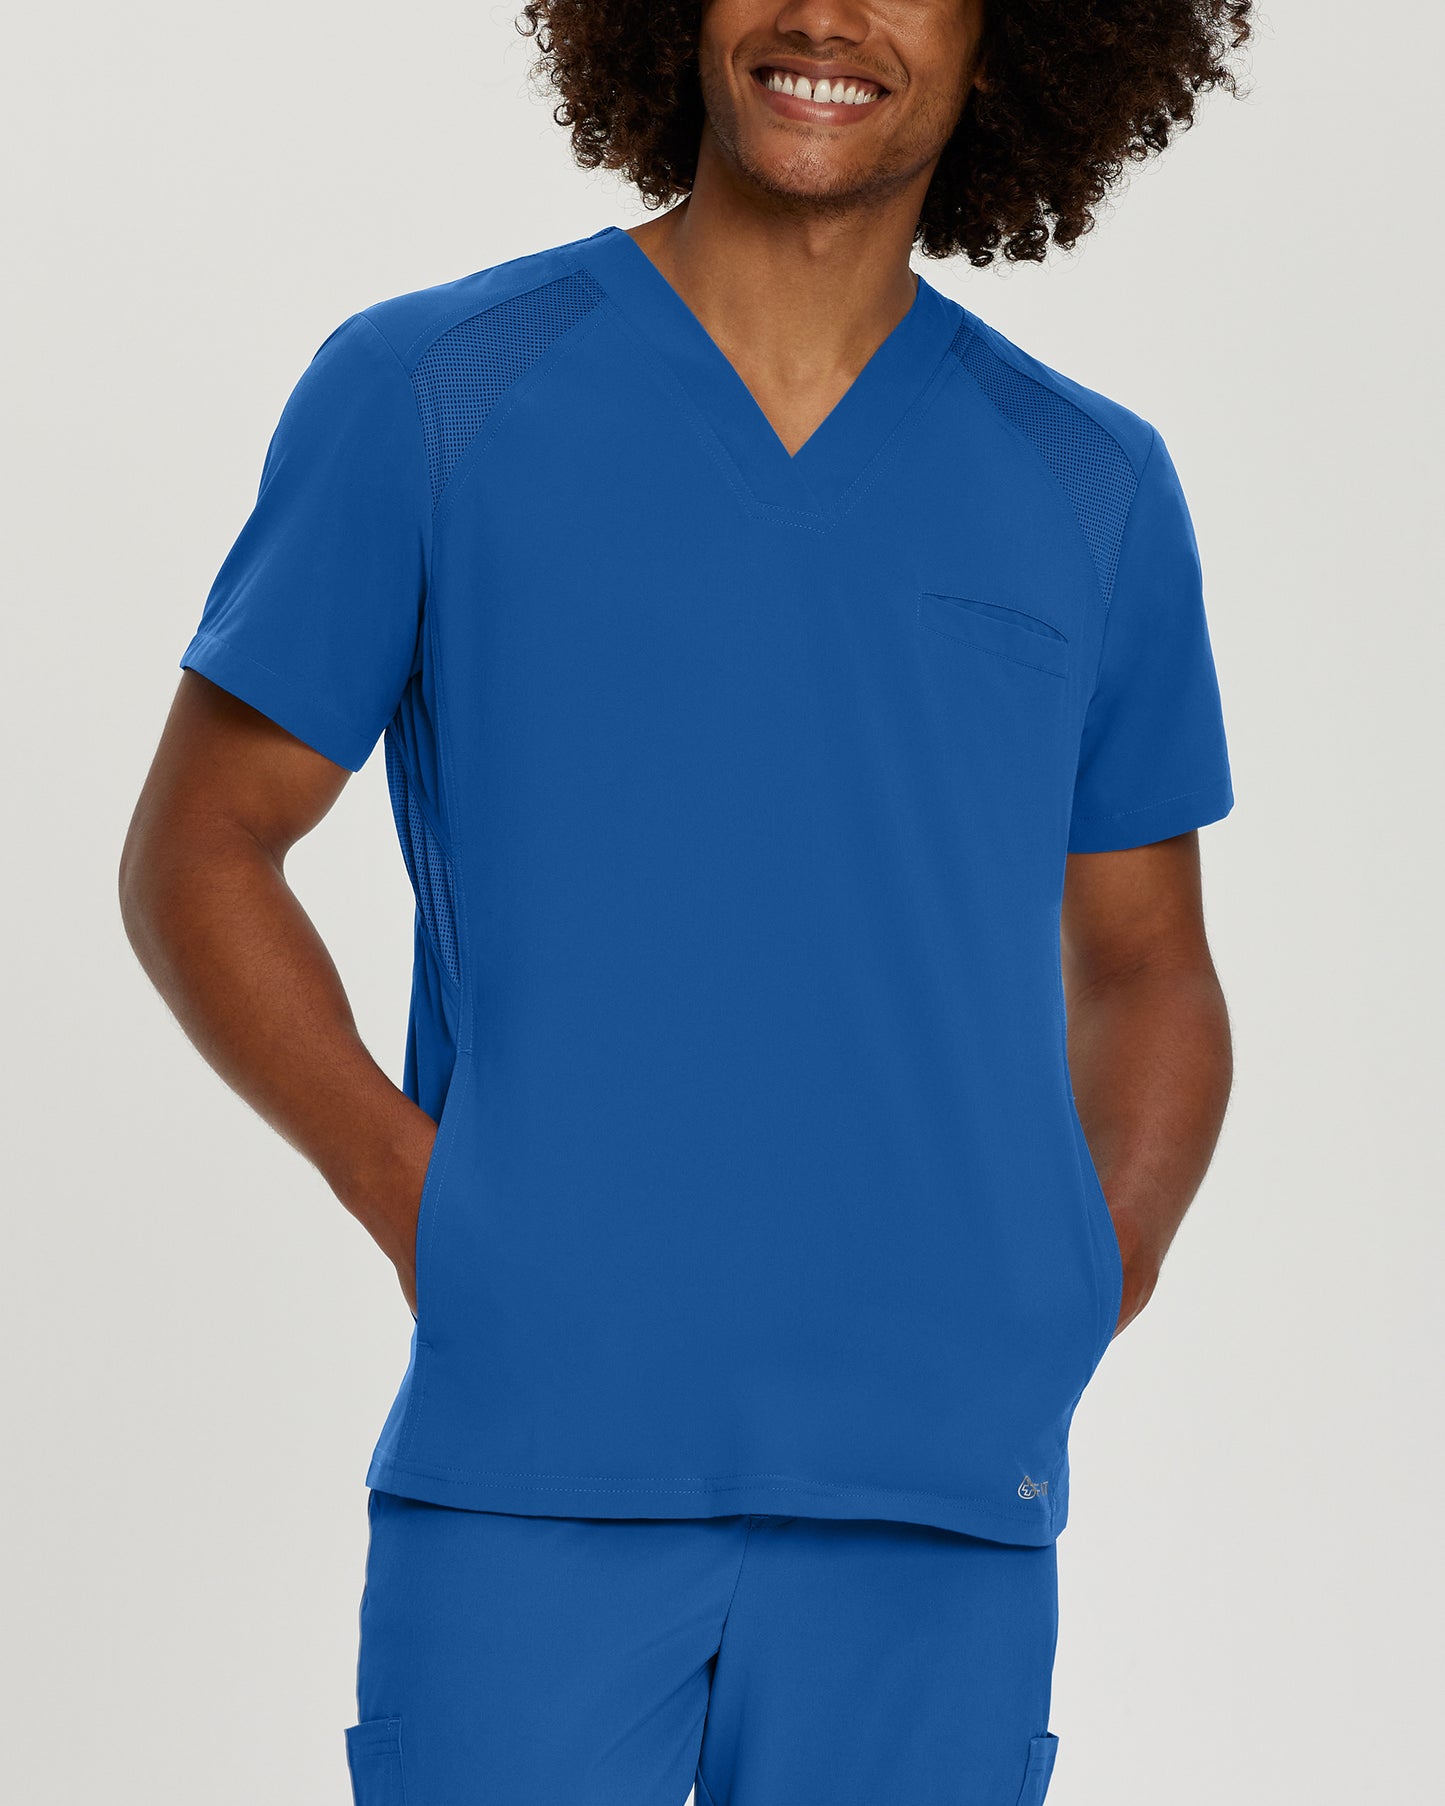 Men's V-neck top with three pockets - FIT - 2266